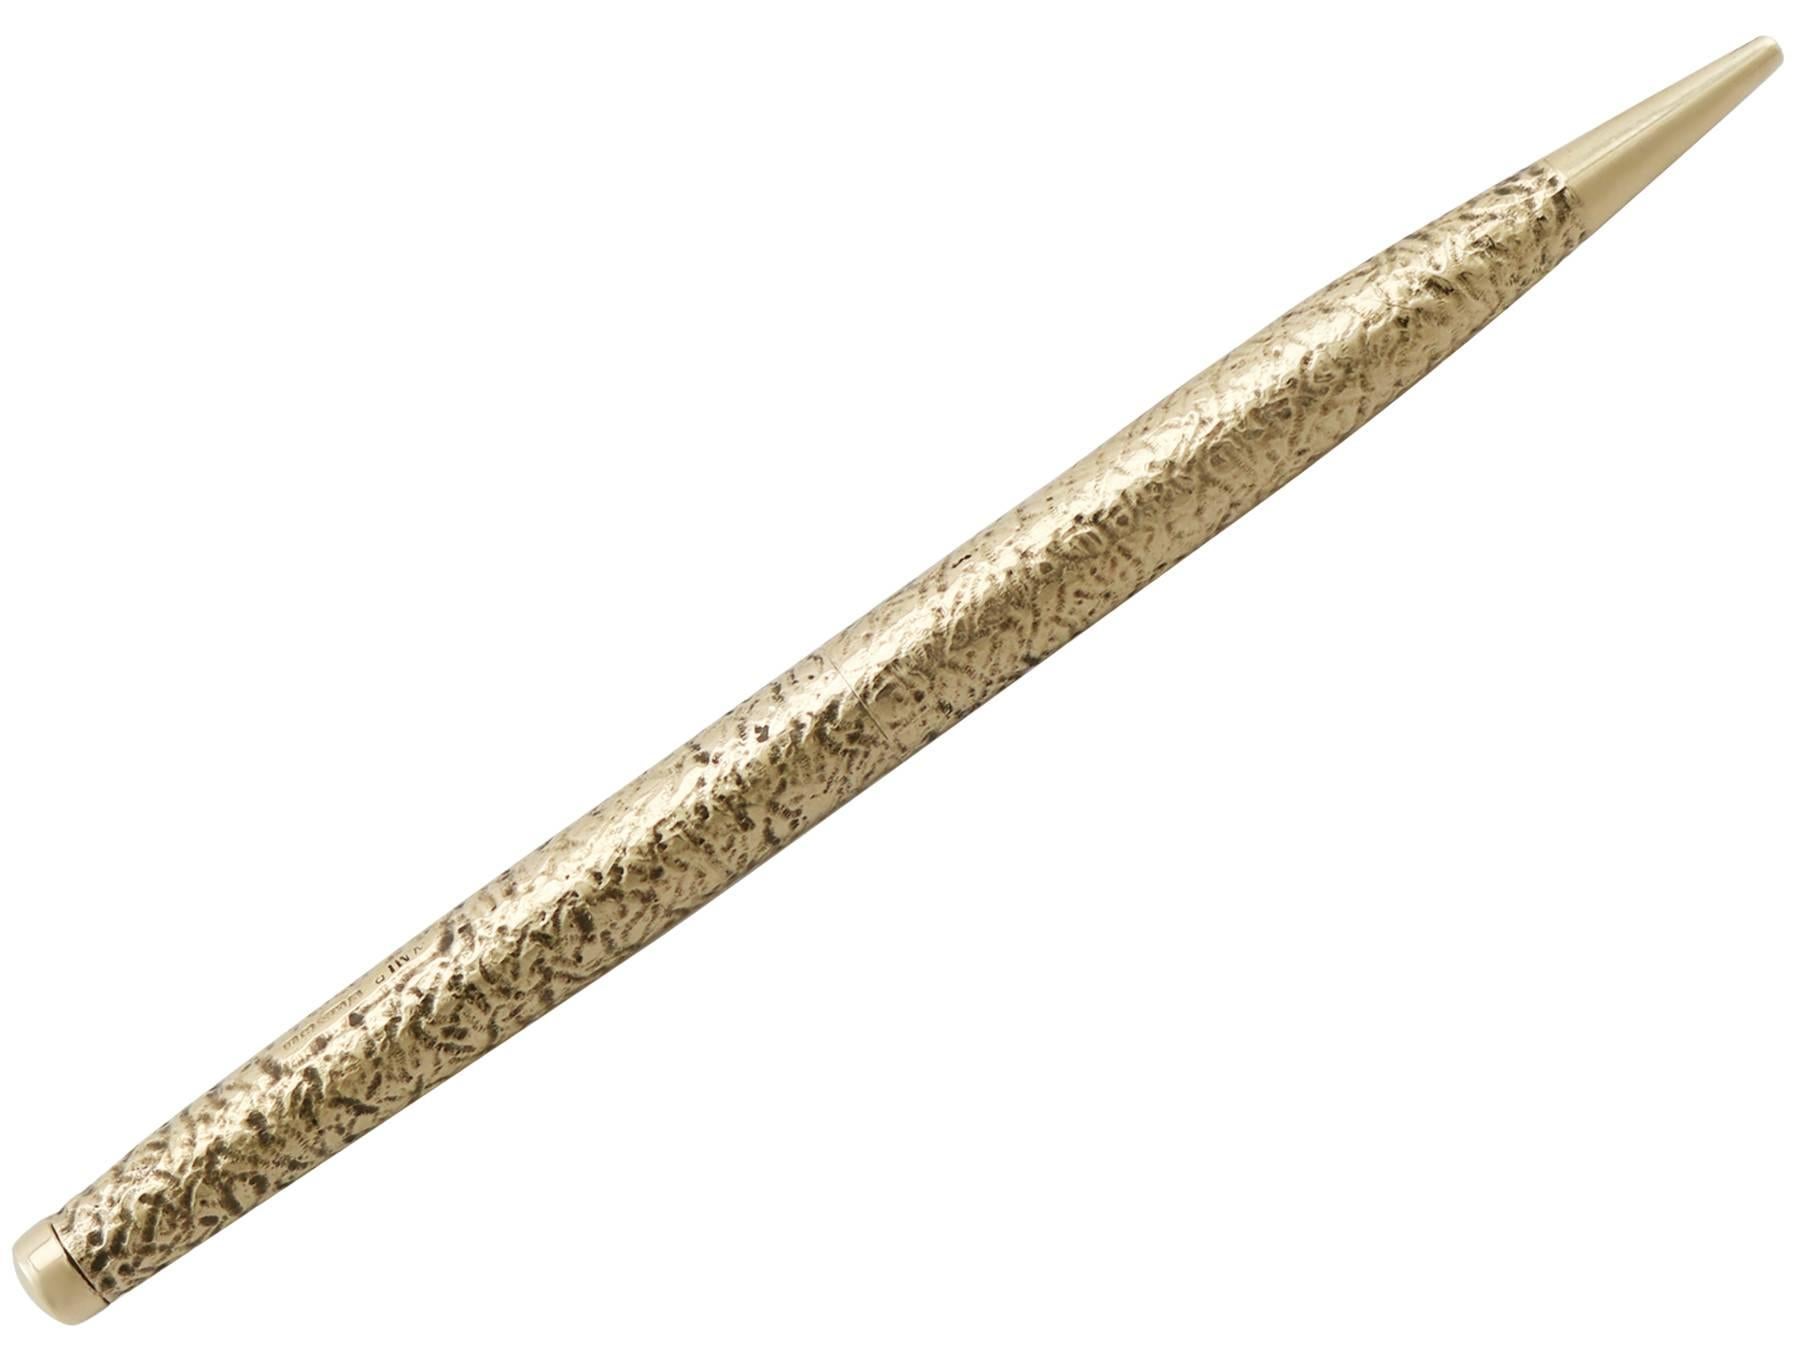 An exceptional, fine and impressive vintage Elizabeth II 9-karat gold pencil; an addition to our ornamental silverware collection.

This exceptional vintage Elizabeth II 9-karat gold pencil has a cylindrical shaft to a tapering tip.

The